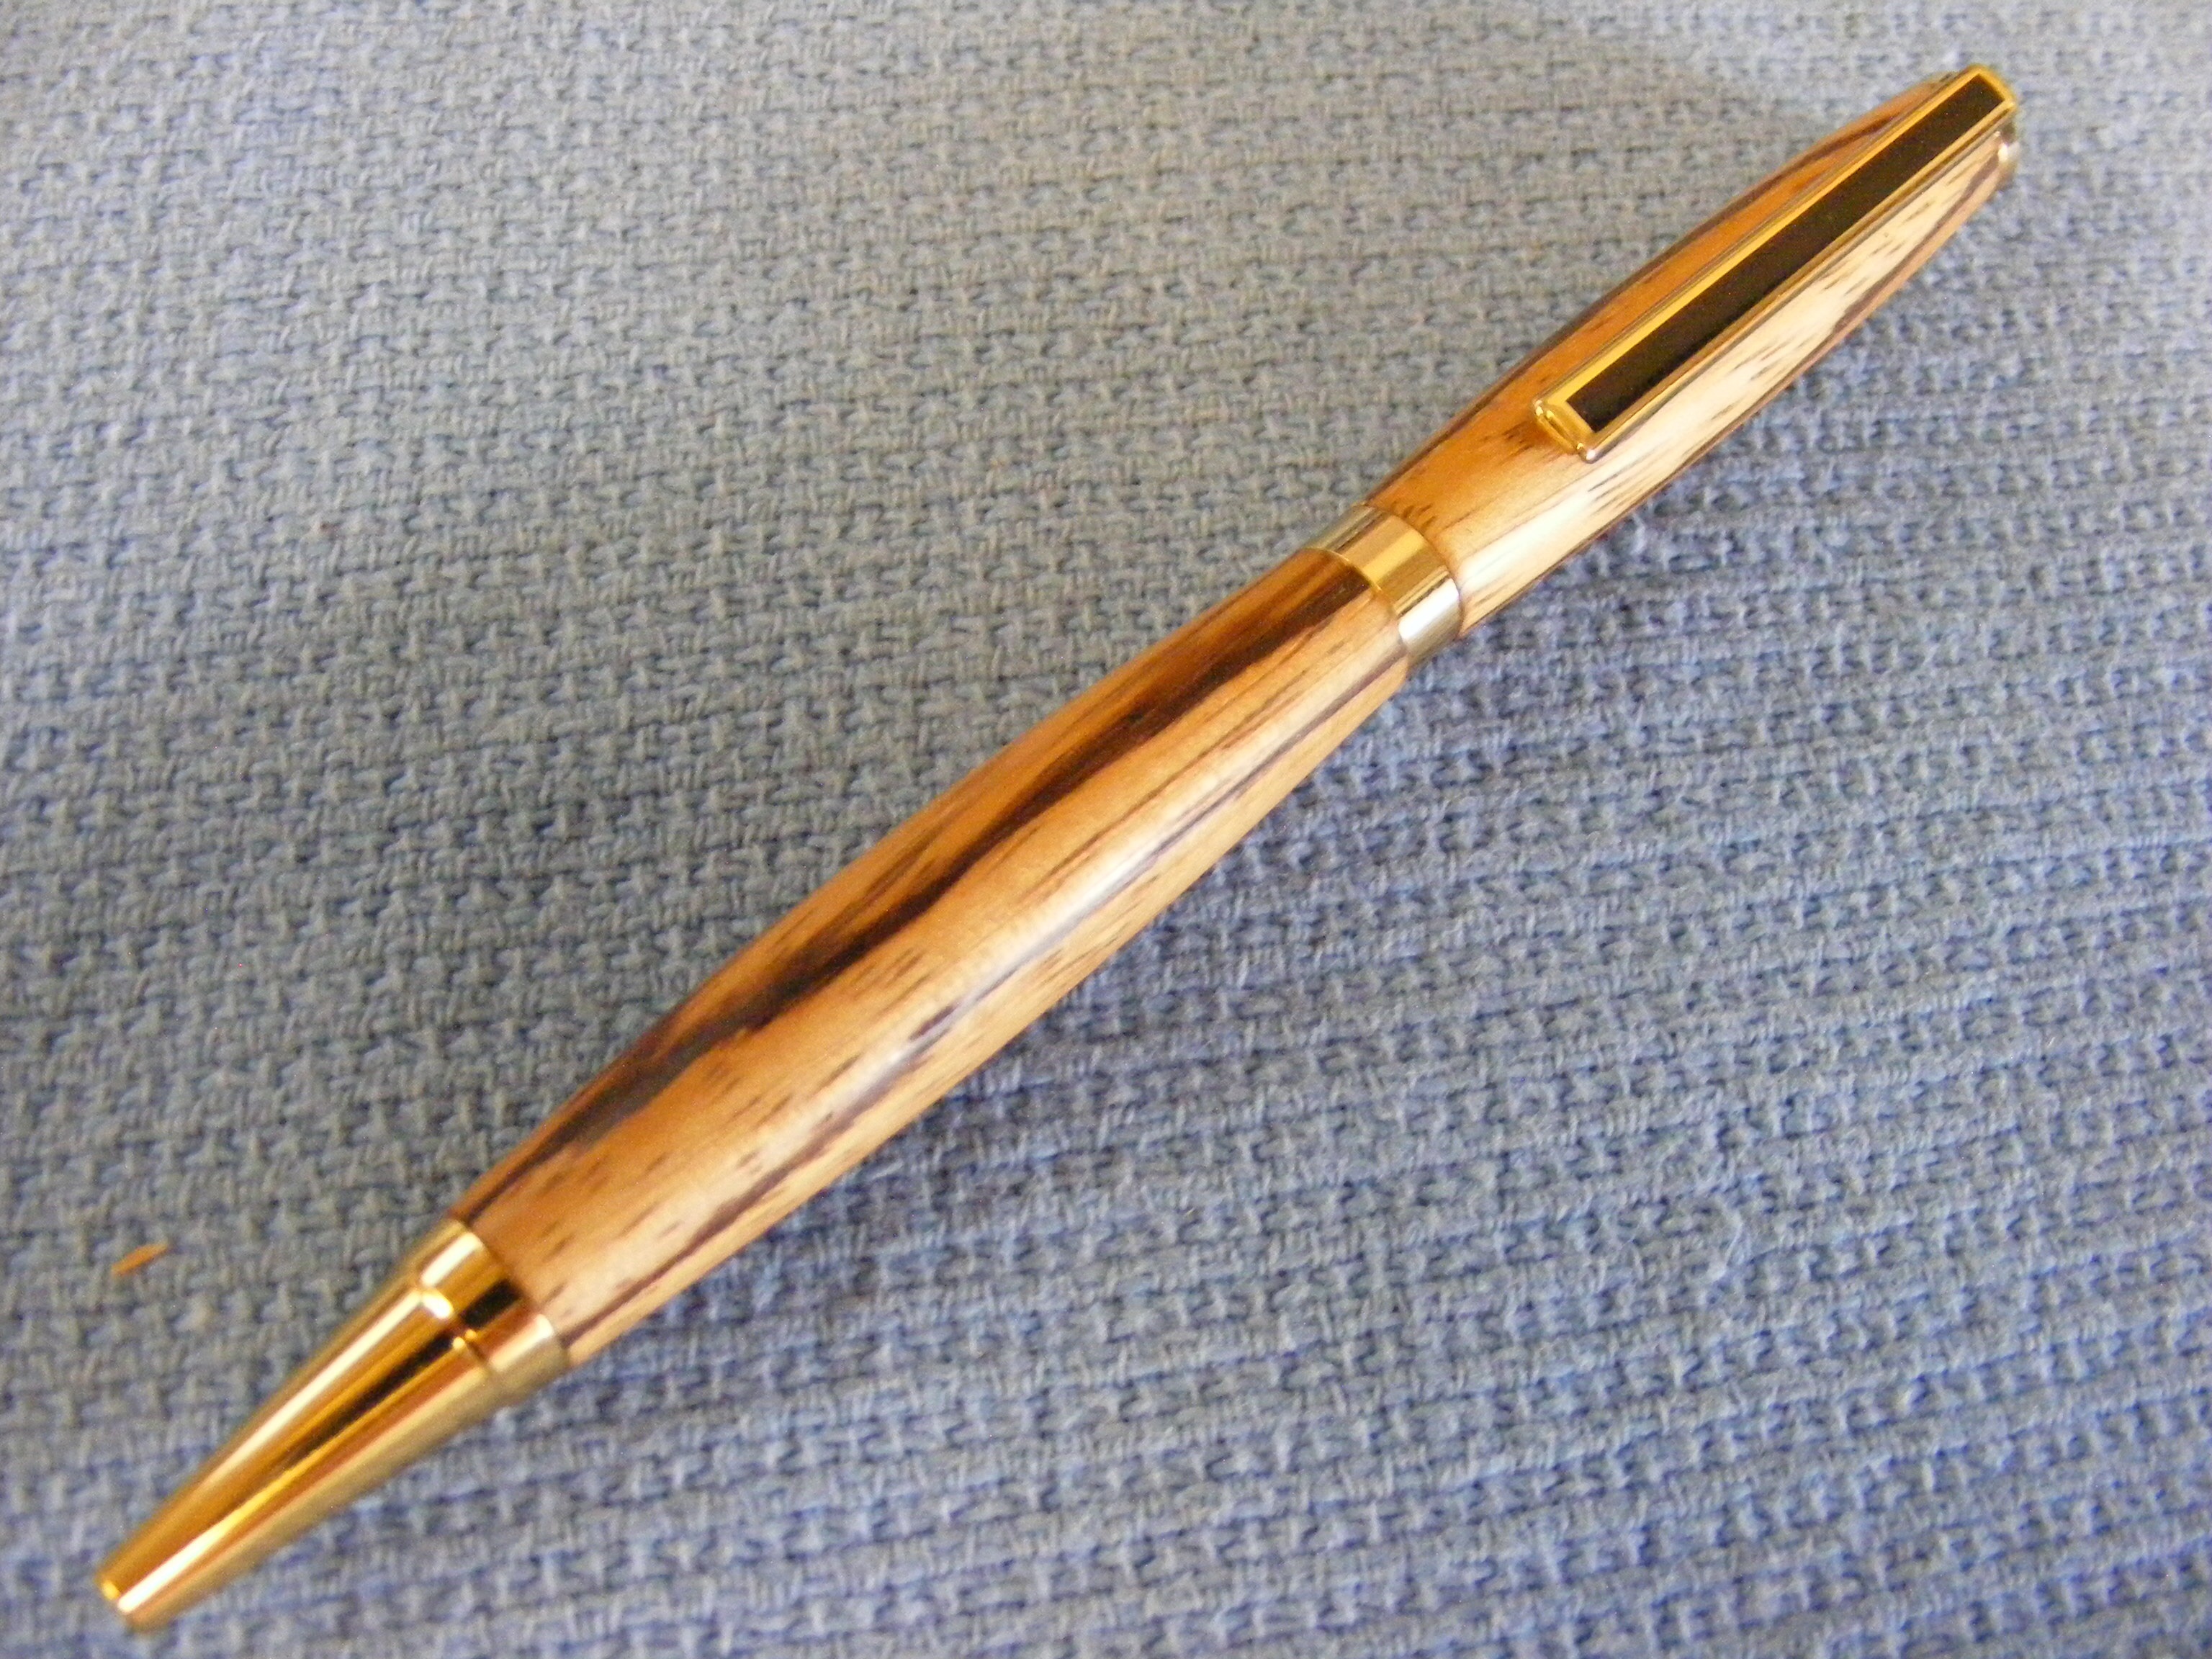 Make a Slimline Pen : 14 Steps (with Pictures) - Instructables